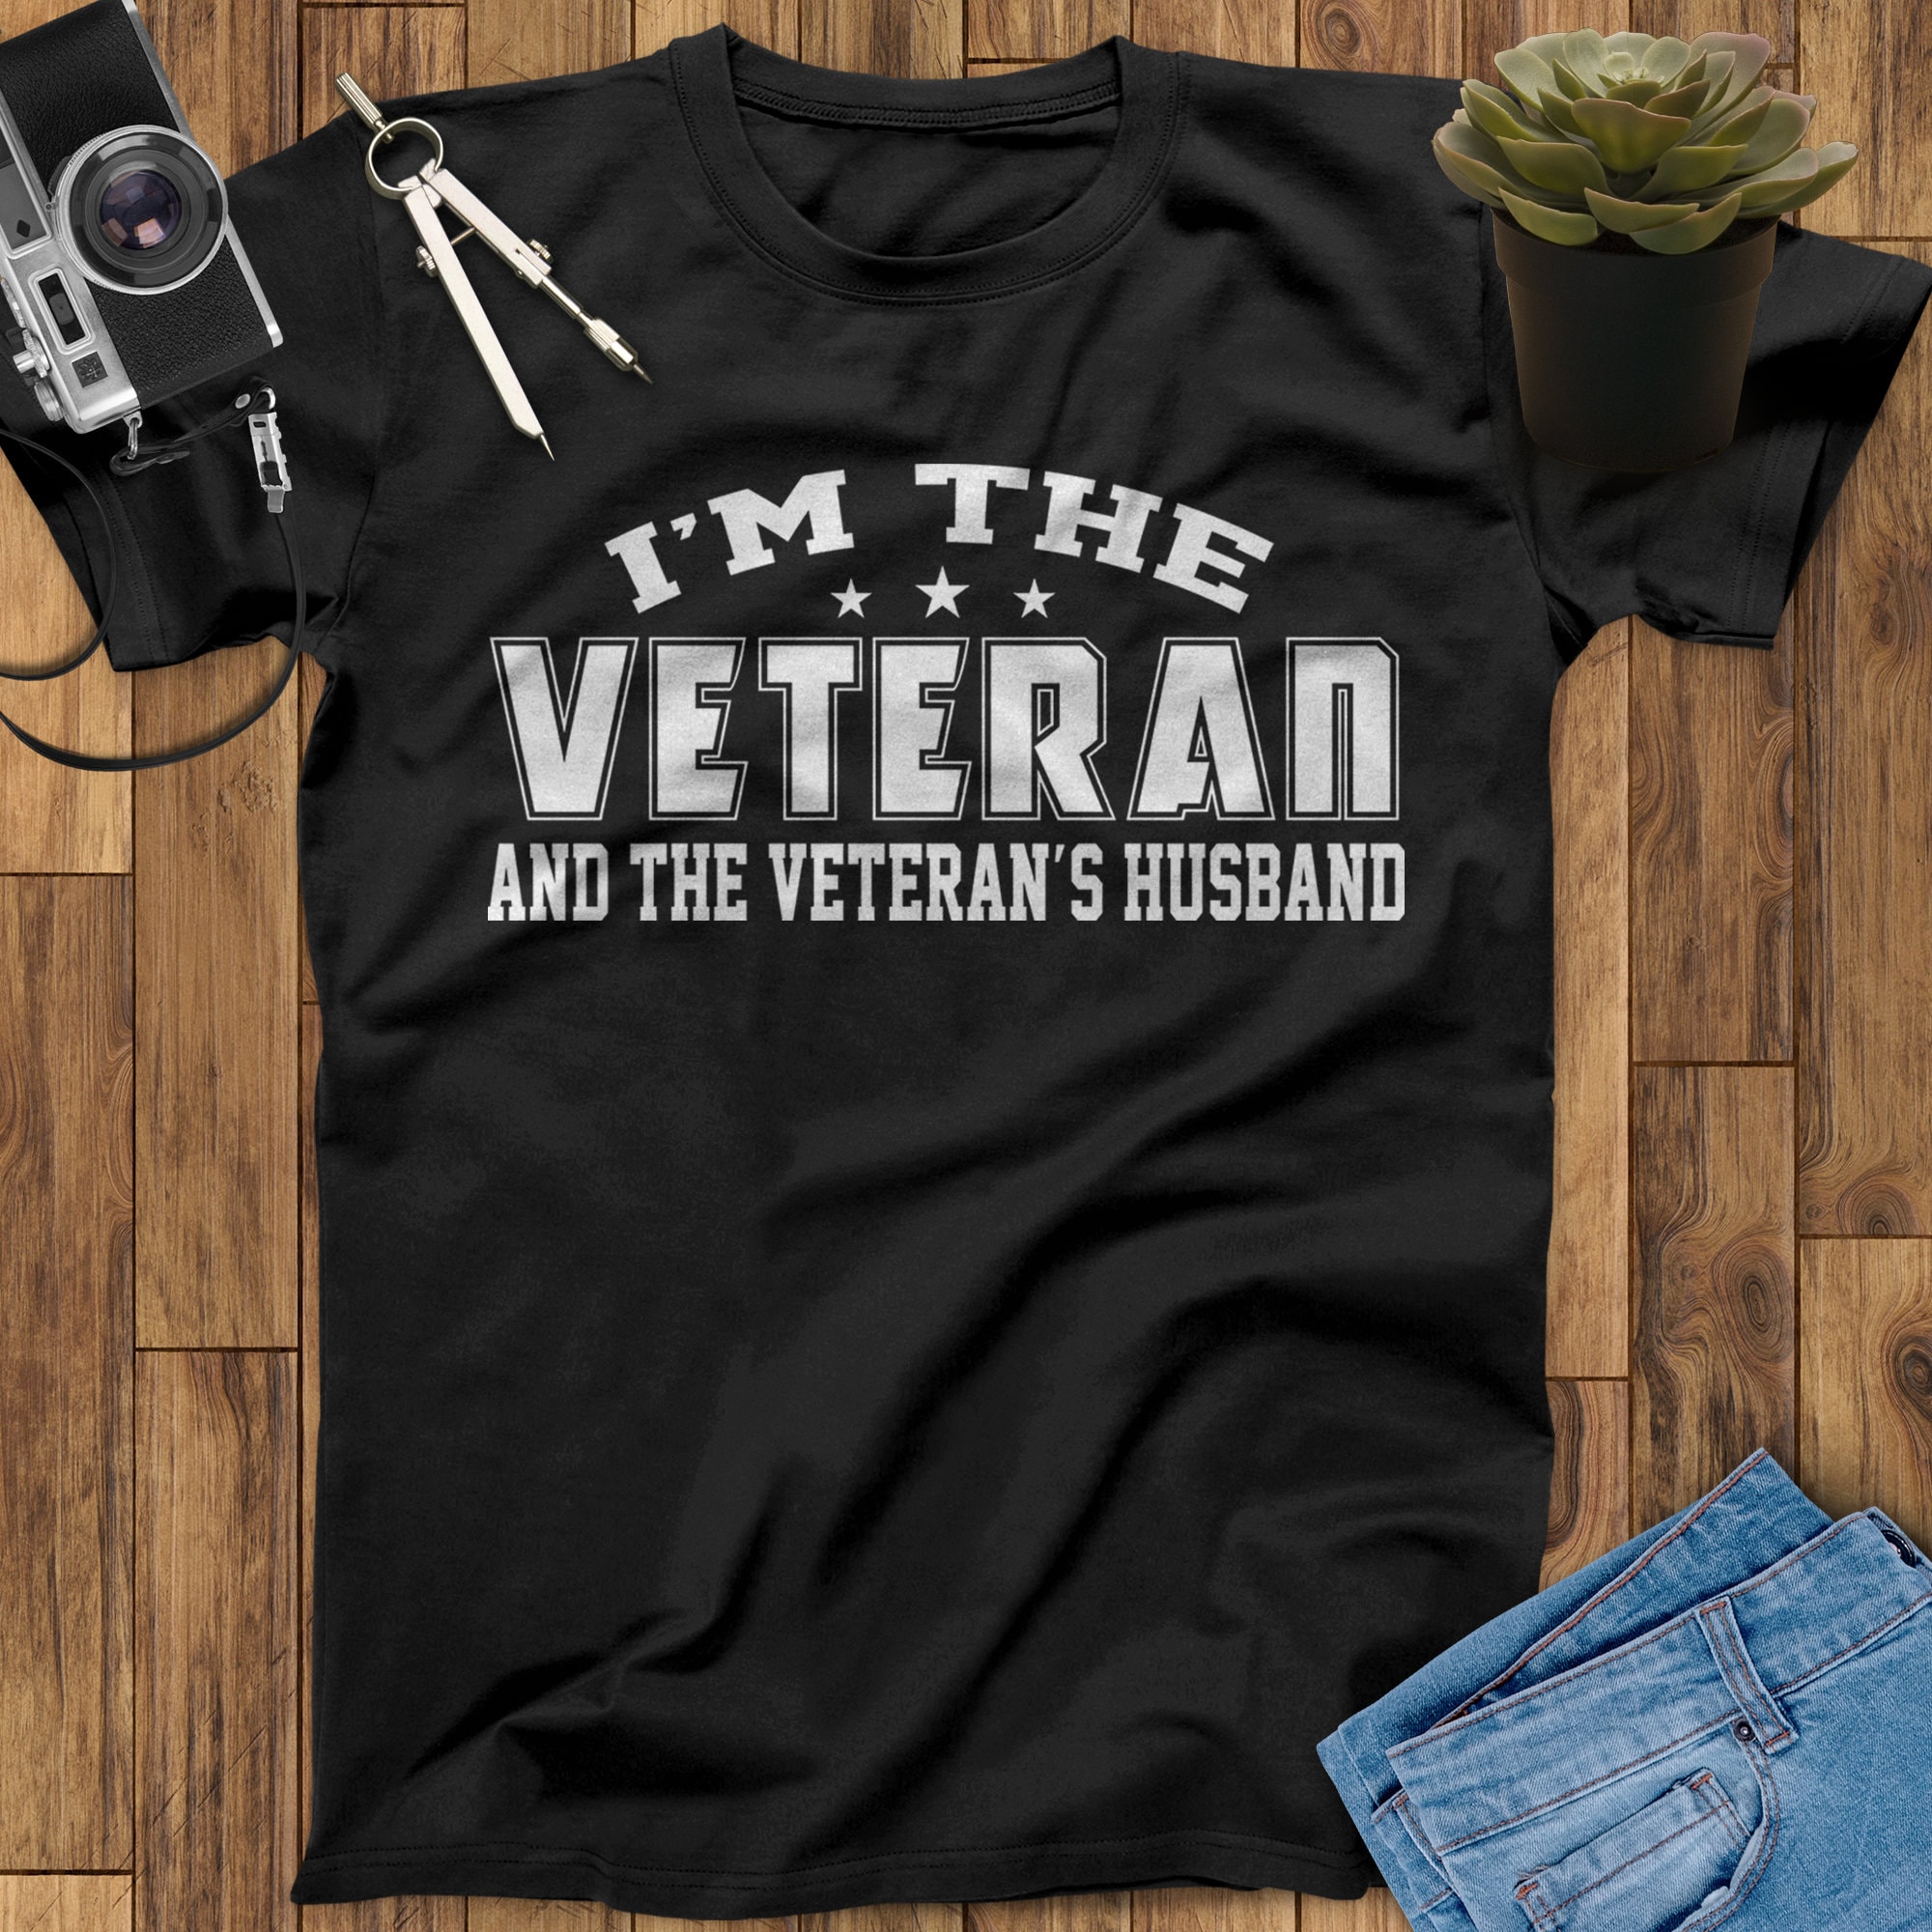 Fashion T-shirt Marine-Veterans Military Gift-Memorial Day-Independence Day-Veterans Day-Air Force Navy Army Military